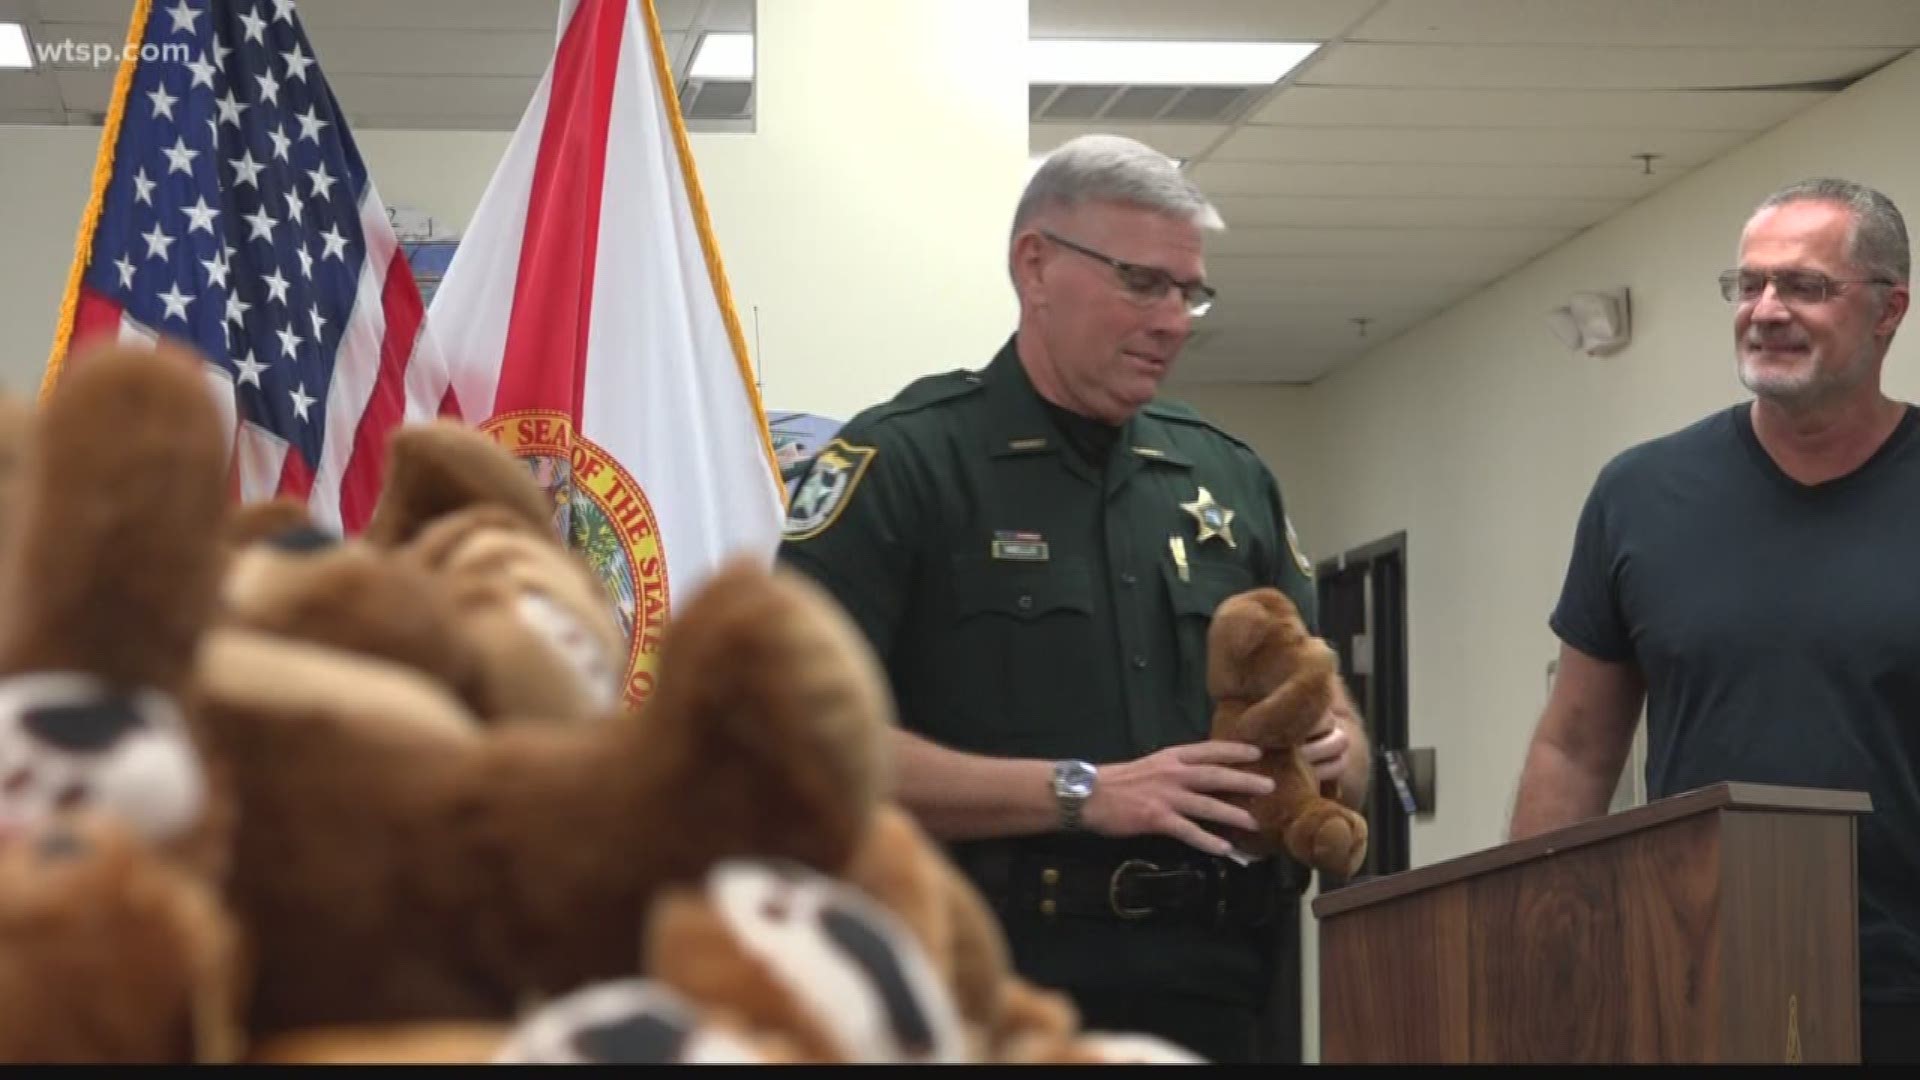 Rod Khleif donated over 600 teddy bears to the Manatee County Sheriff's Office. https://on.wtsp.com/2kNZcTo